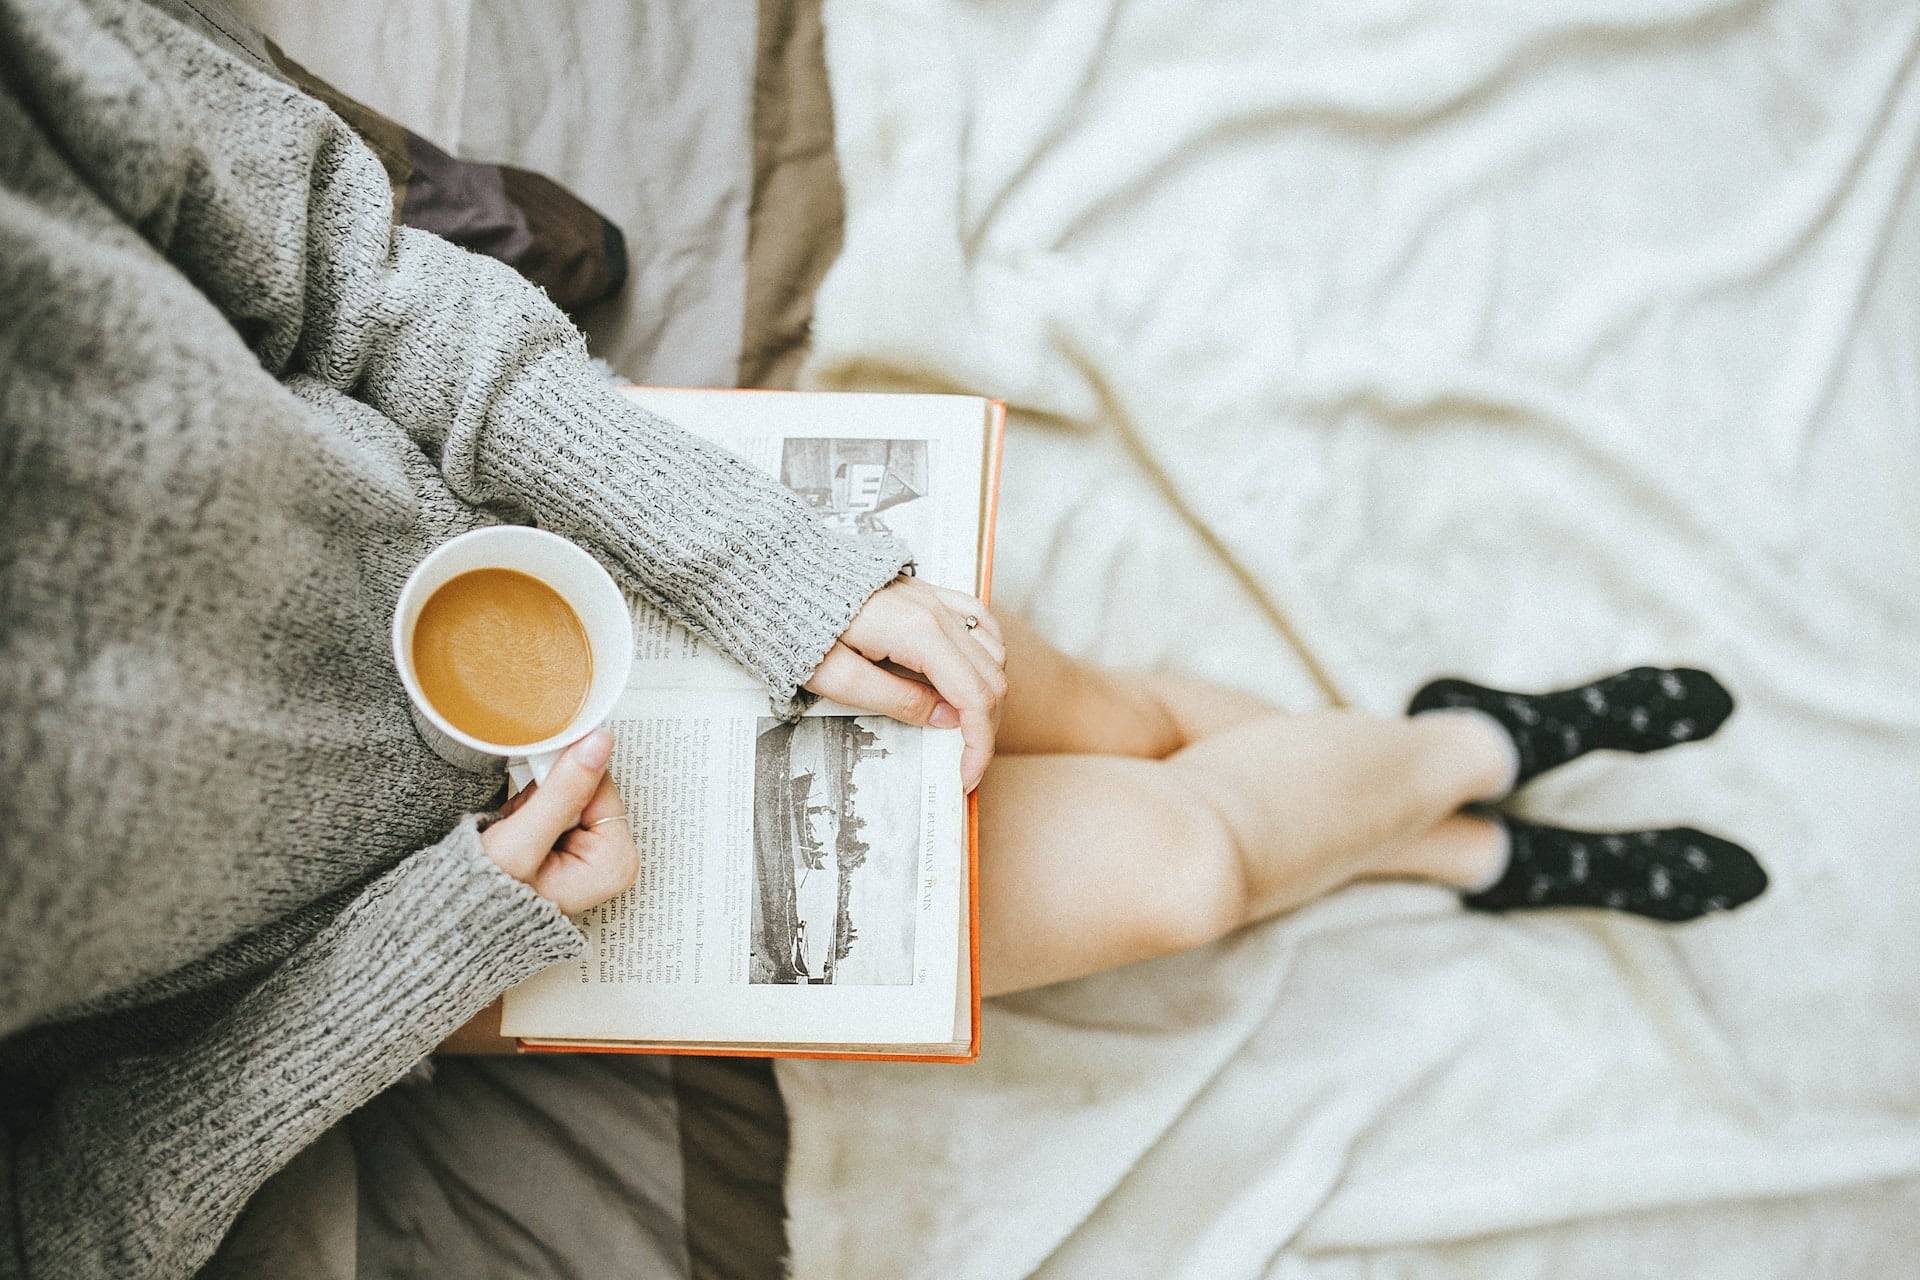 Is Reading a Legitimate Hobby? Here's Why